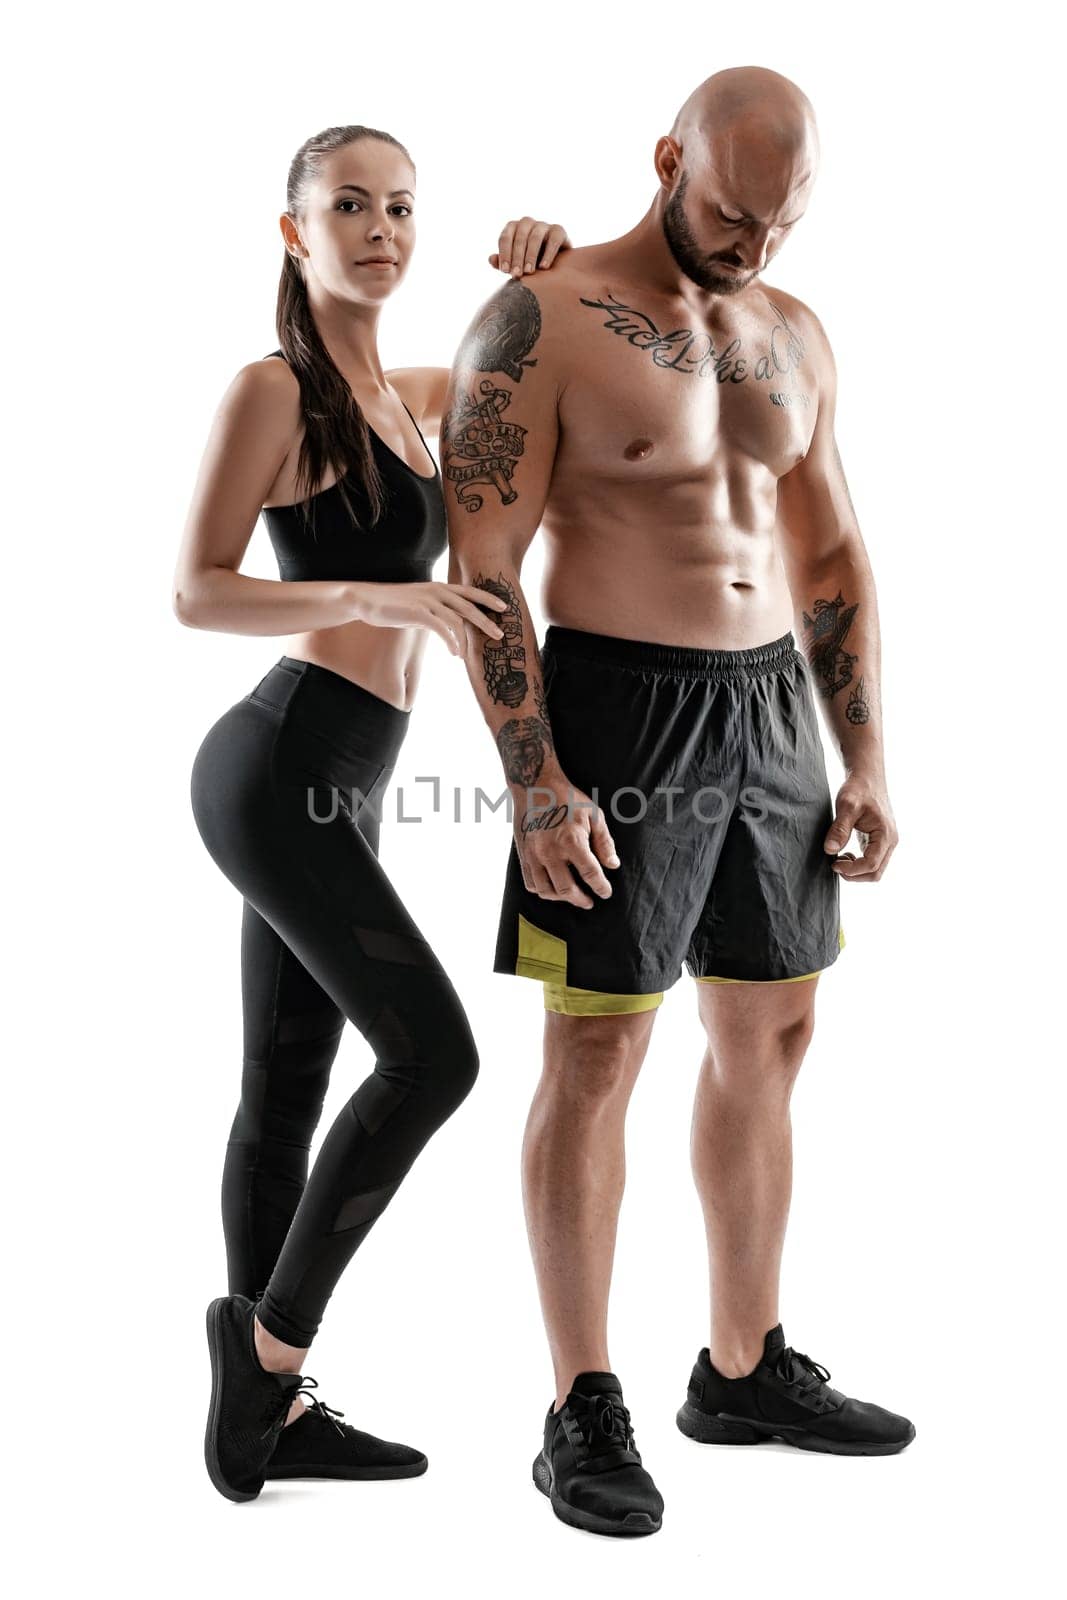 Strong bald, tattooed male in black shorts and sneakers with charming brunette female in leggings and top are posing isolated on white background and looking at the camera. Fitness couple, chic muscular bodies, gym concept. The love story.